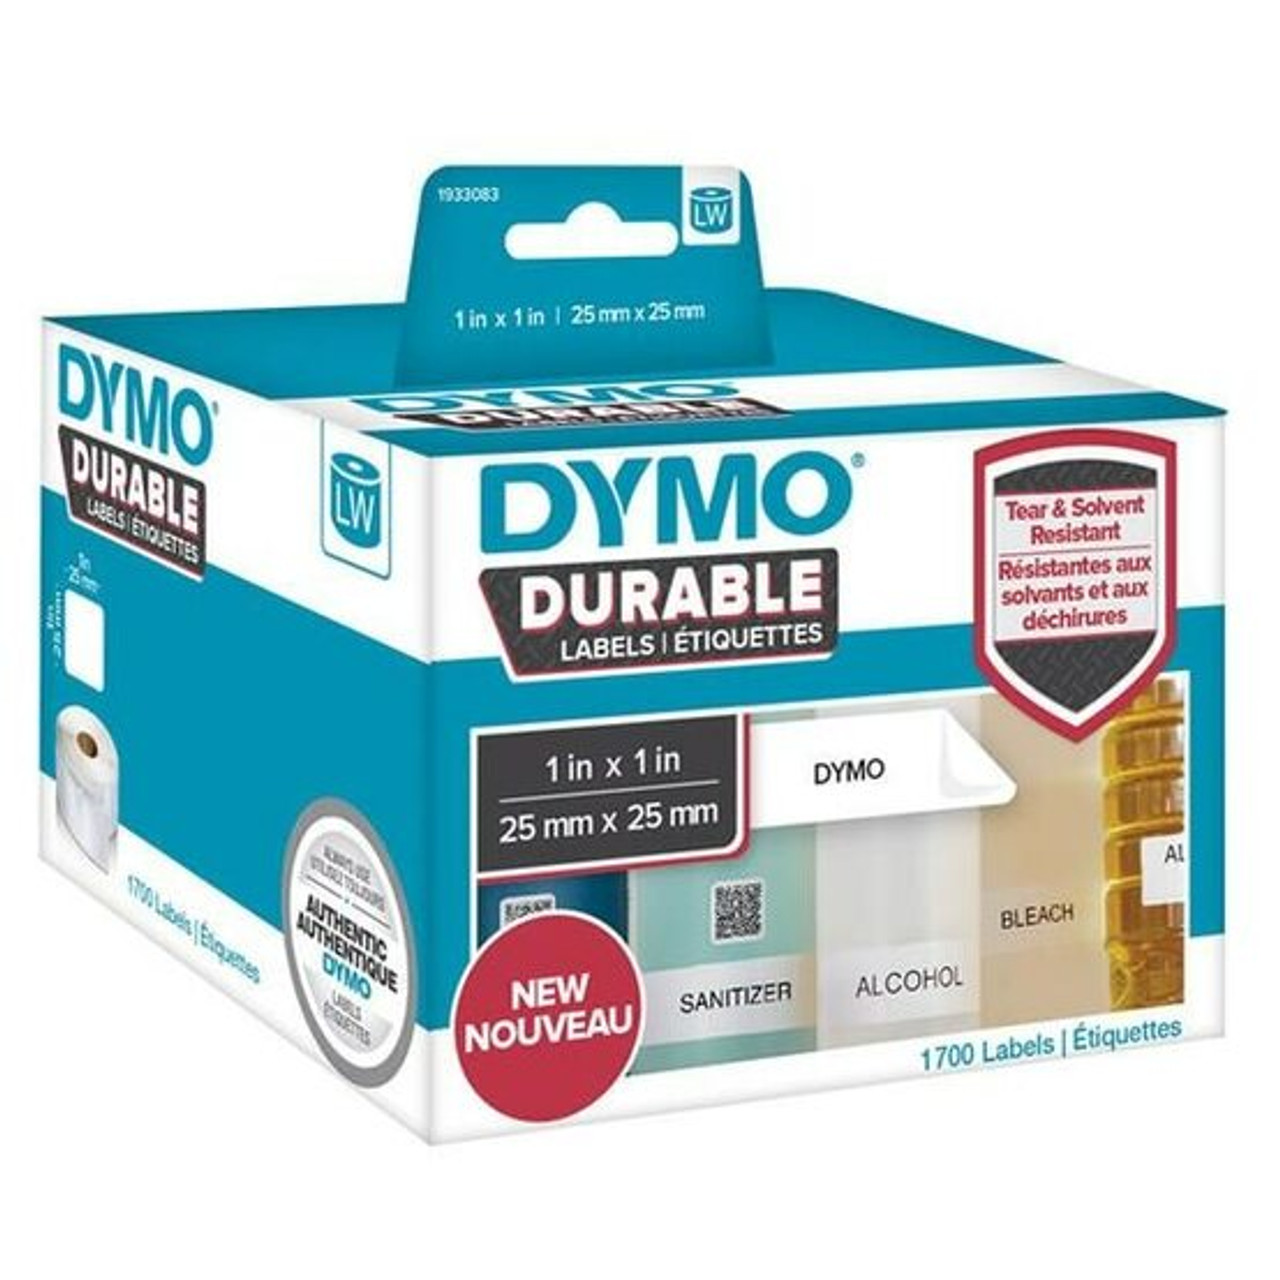 Dymo LabelWriter Durable Multi Purpose Labels 25mm x 25mm - The